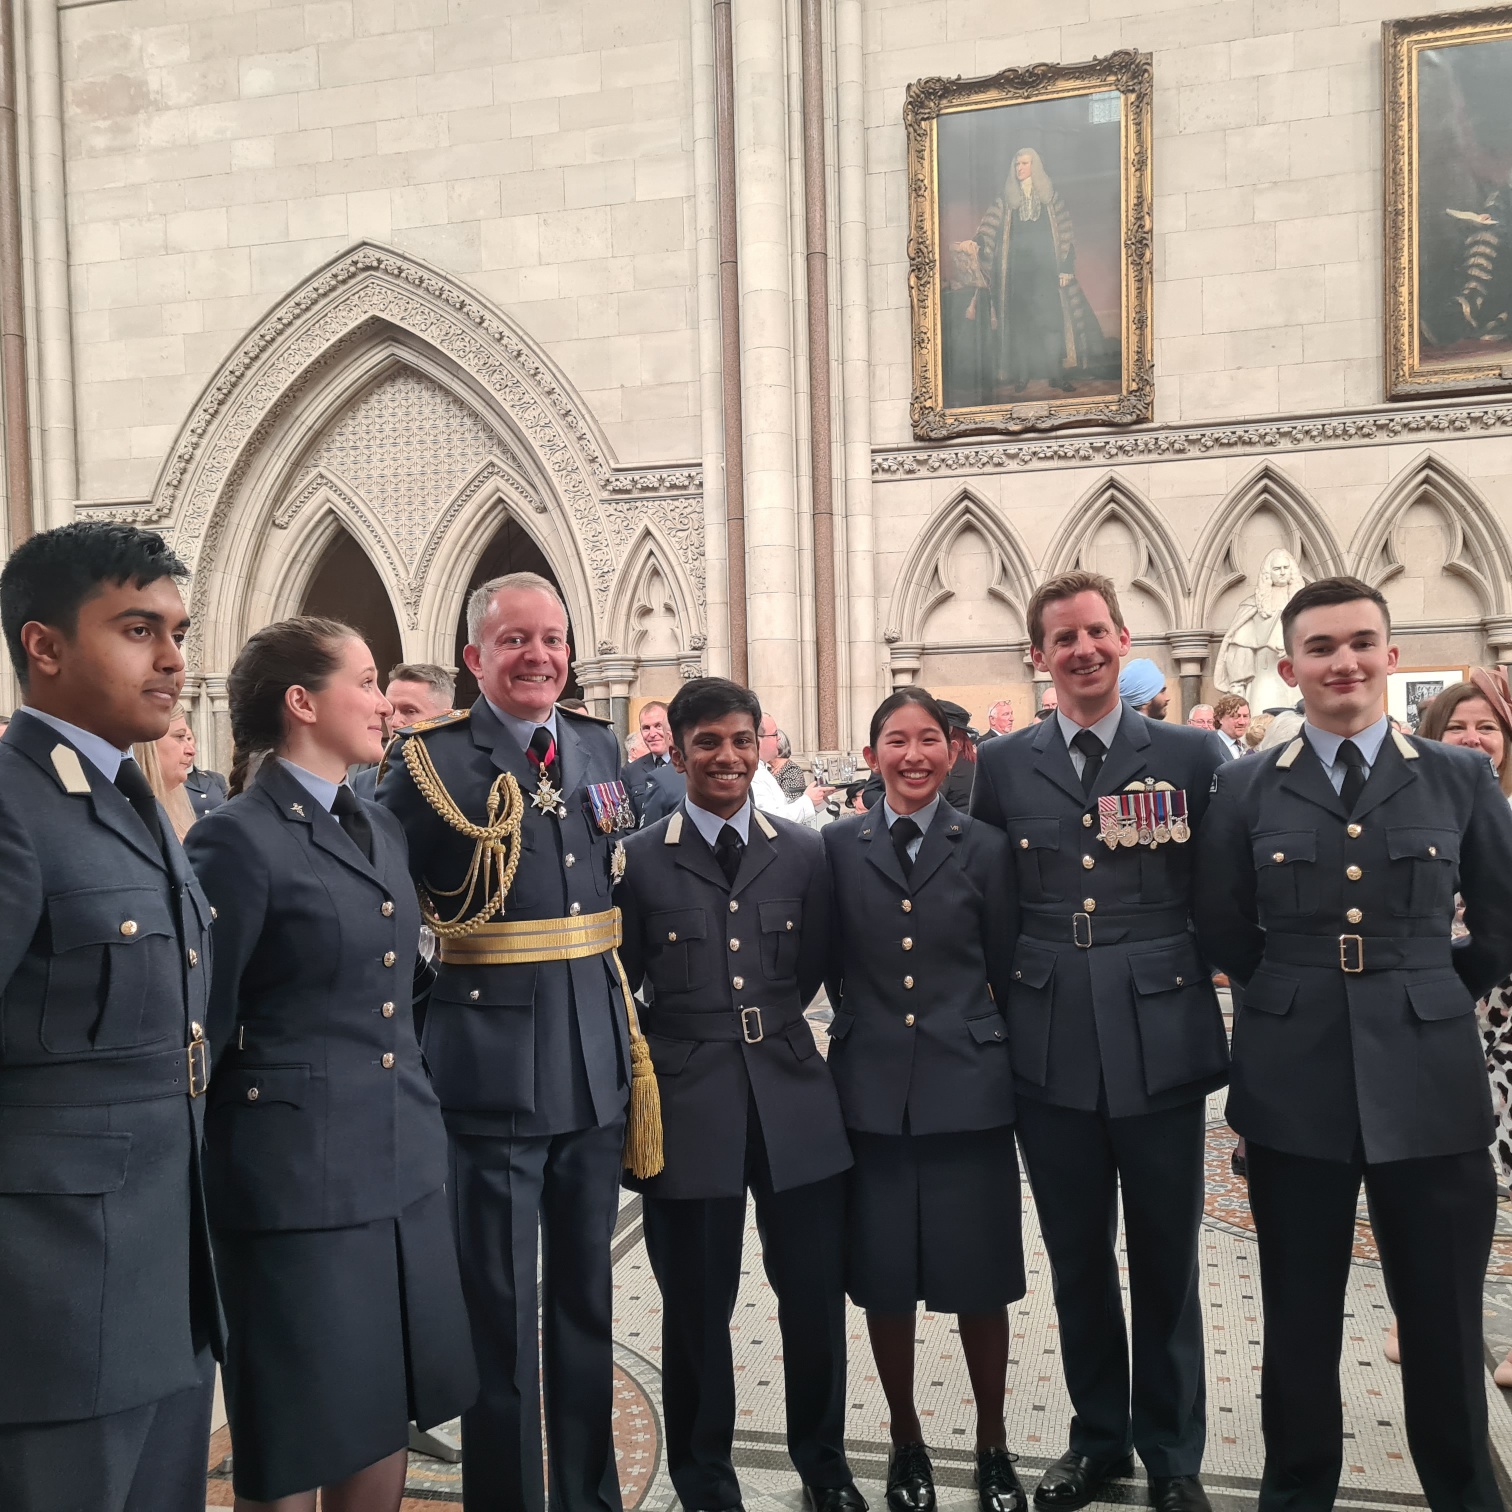 Image shows RAF personnel and cadets standing in St Clements Danes Church.